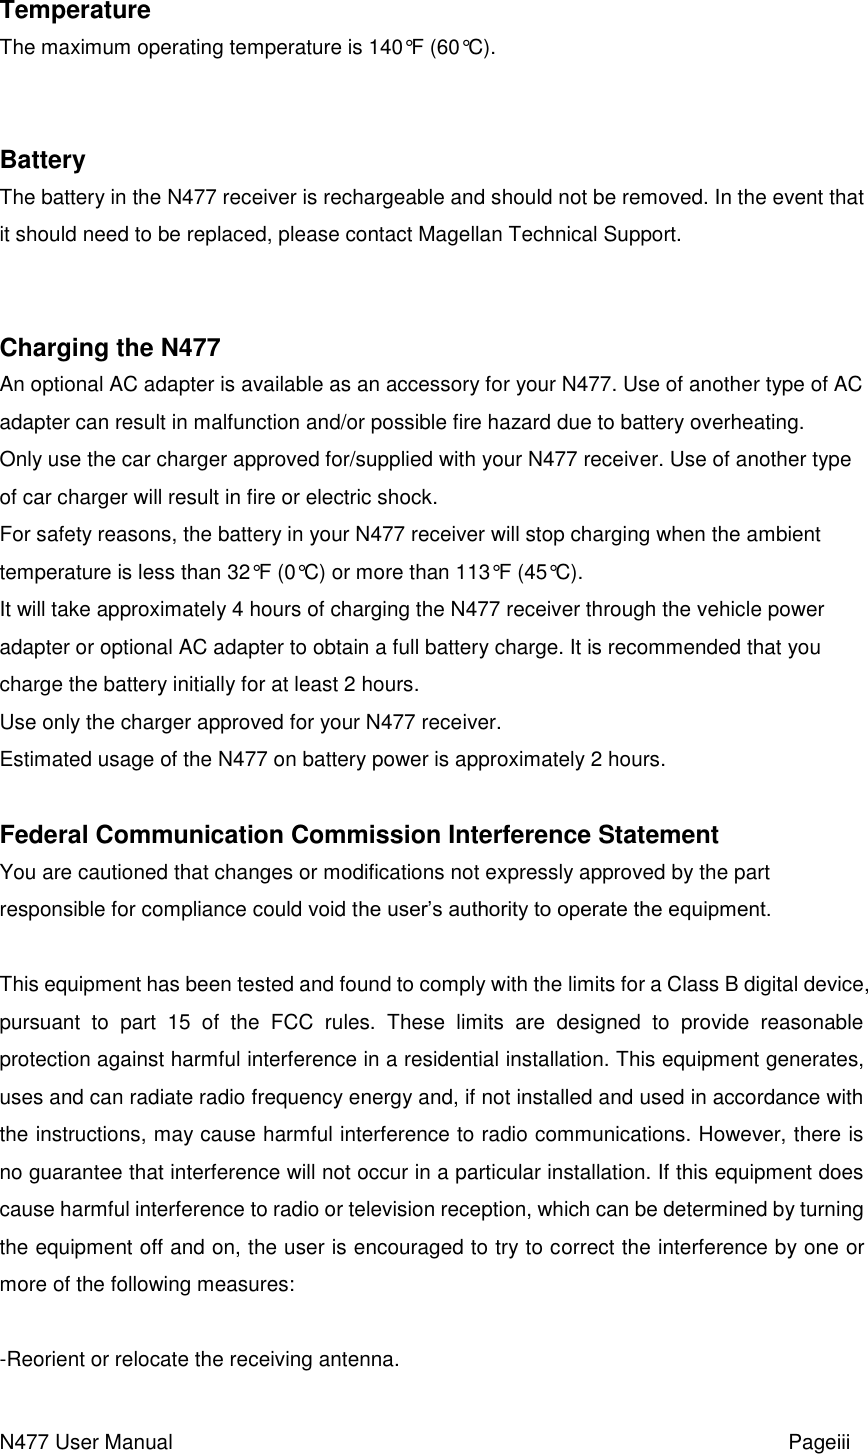 N477 User Manual                                                           Pageiii   Temperature The maximum operating temperature is 140°F (60°C).   Battery The battery in the N477 receiver is rechargeable and should not be removed. In the event that it should need to be replaced, please contact Magellan Technical Support.   Charging the N477 An optional AC adapter is available as an accessory for your N477. Use of another type of AC adapter can result in malfunction and/or possible fire hazard due to battery overheating. Only use the car charger approved for/supplied with your N477 receiver. Use of another type of car charger will result in fire or electric shock. For safety reasons, the battery in your N477 receiver will stop charging when the ambient temperature is less than 32°F (0°C) or more than 113°F (45°C). It will take approximately 4 hours of charging the N477 receiver through the vehicle power adapter or optional AC adapter to obtain a full battery charge. It is recommended that you charge the battery initially for at least 2 hours. Use only the charger approved for your N477 receiver. Estimated usage of the N477 on battery power is approximately 2 hours.  Federal Communication Commission Interference Statement You are cautioned that changes or modifications not expressly approved by the part responsible for compliance could void the user’s authority to operate the equipment.  This equipment has been tested and found to comply with the limits for a Class B digital device, pursuant  to  part  15  of  the  FCC  rules.  These  limits  are  designed  to  provide  reasonable protection against harmful interference in a residential installation. This equipment generates, uses and can radiate radio frequency energy and, if not installed and used in accordance with the instructions, may cause harmful interference to radio communications. However, there is no guarantee that interference will not occur in a particular installation. If this equipment does cause harmful interference to radio or television reception, which can be determined by turning the equipment off and on, the user is encouraged to try to correct the interference by one or more of the following measures:  -Reorient or relocate the receiving antenna. 